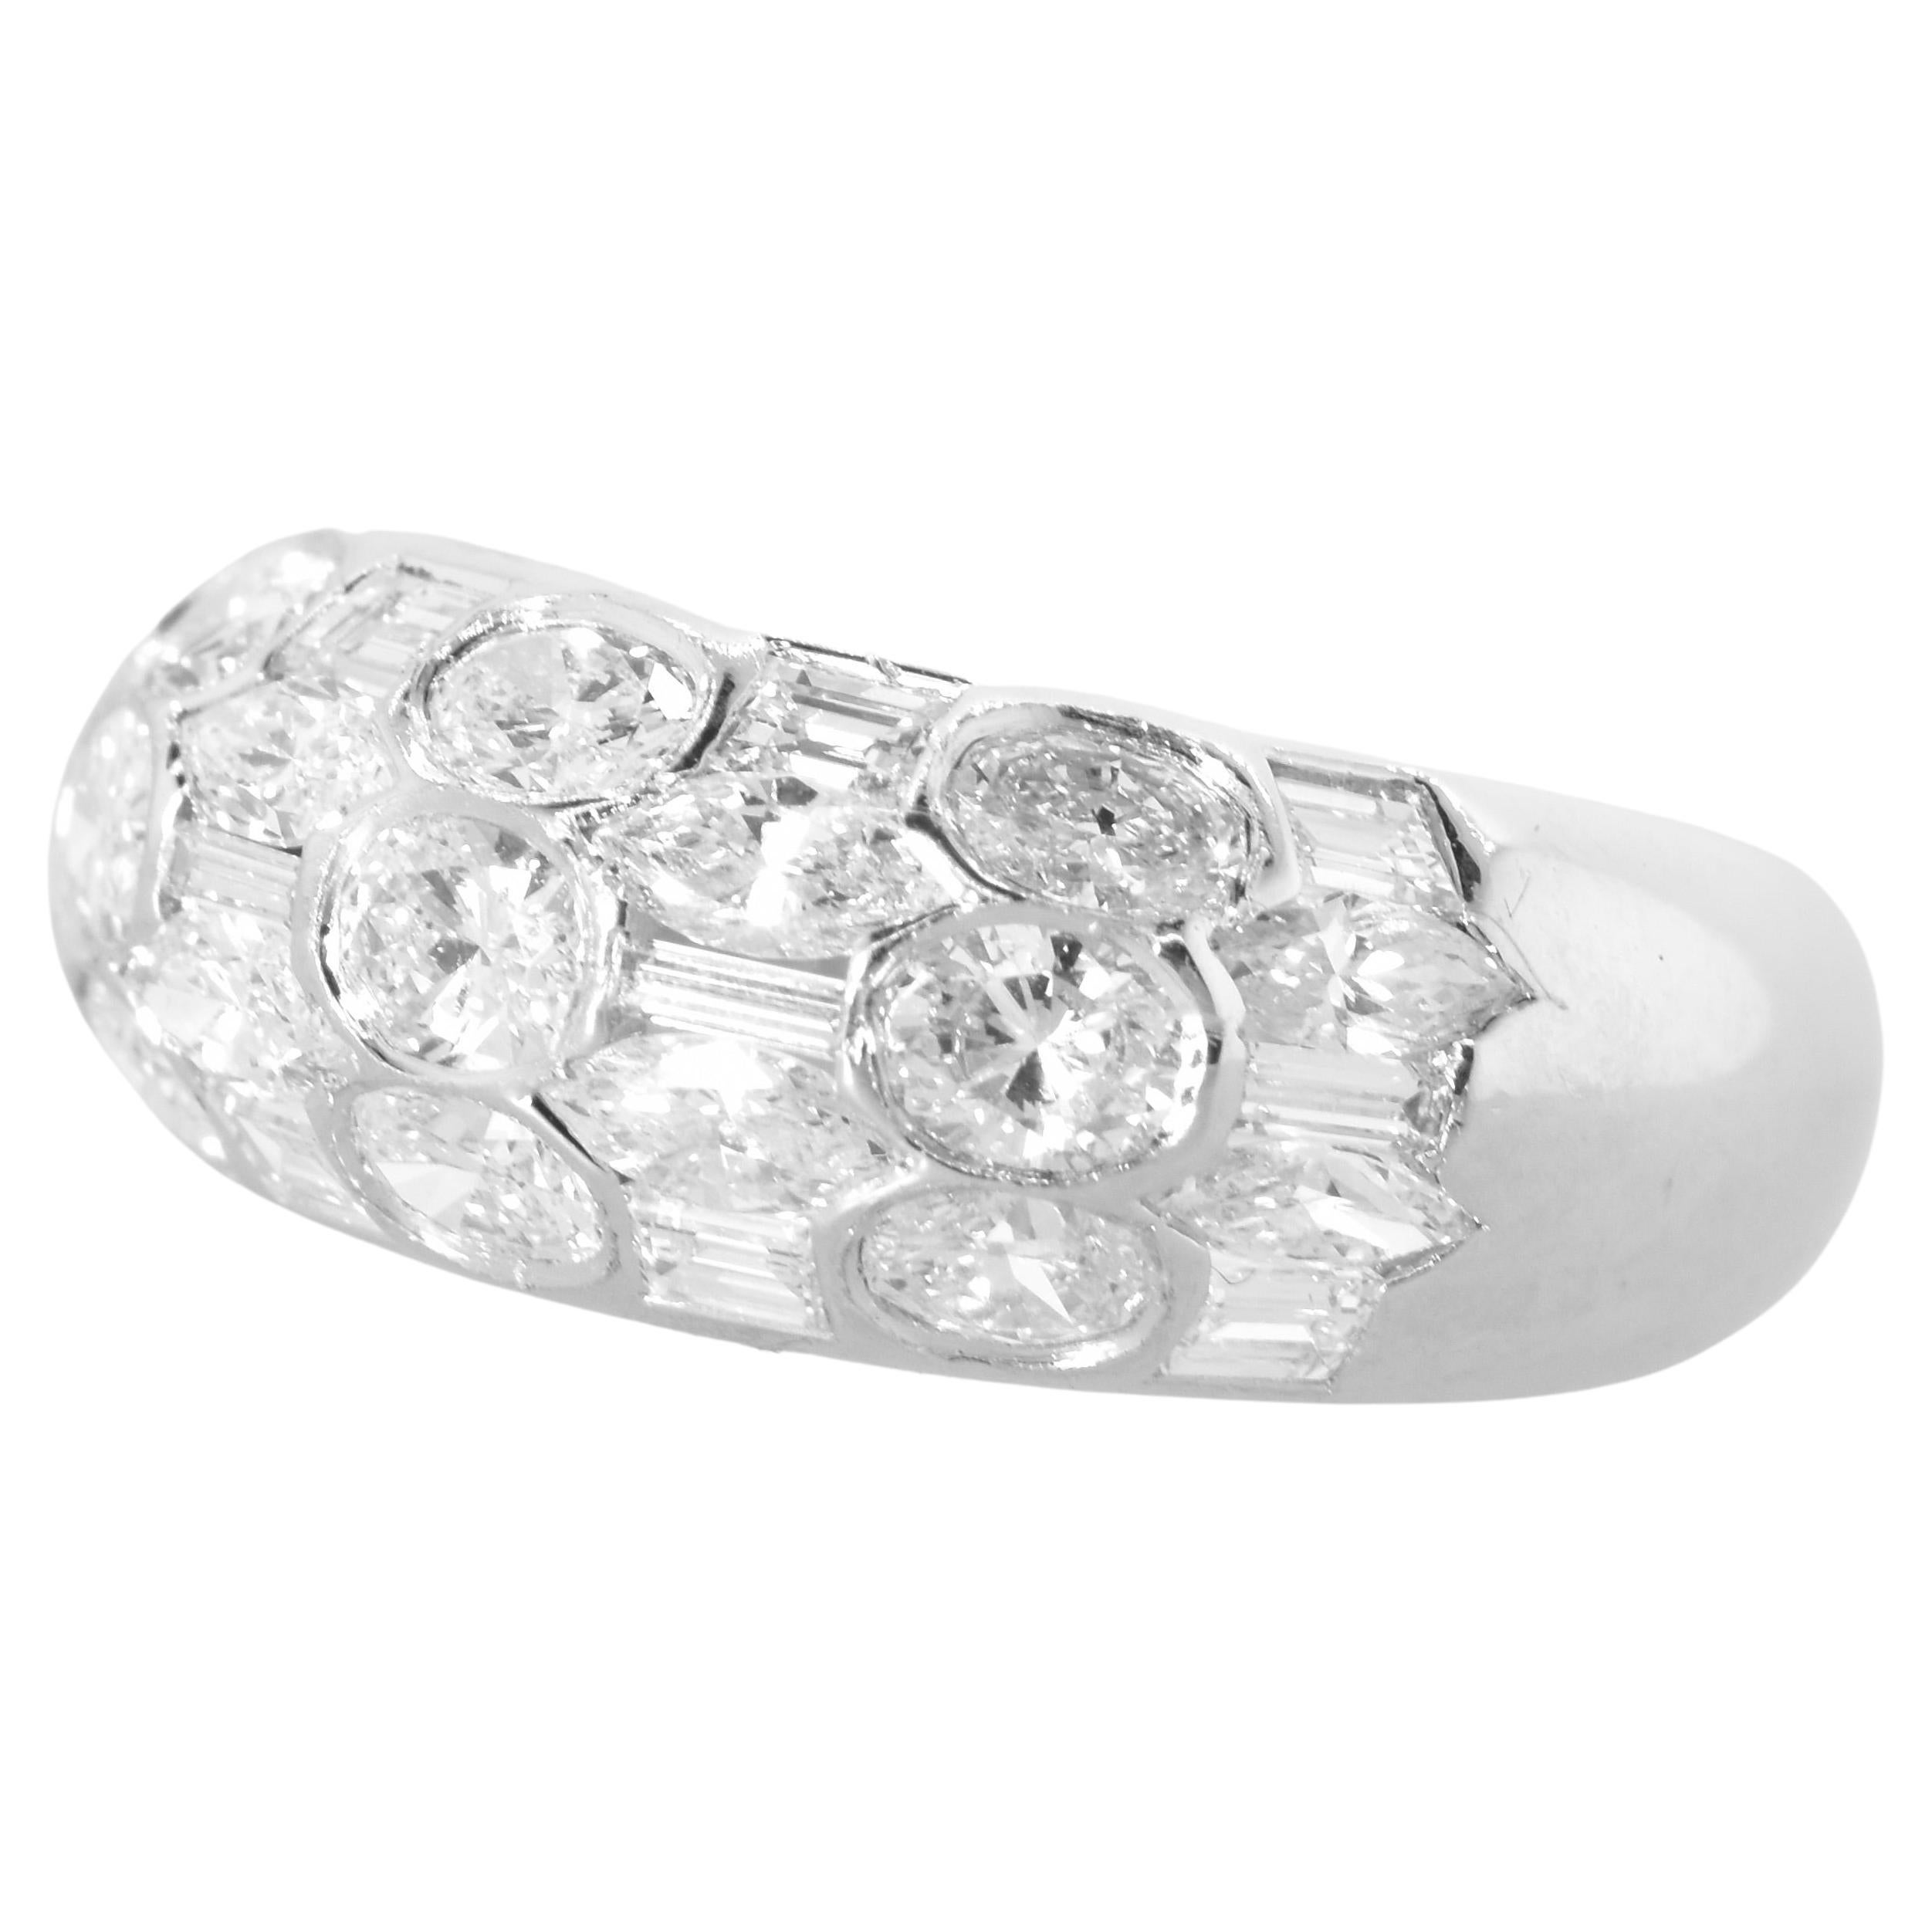 Contemporary Fancy Cut Diamond with 2.50 cts. of fine white stones set in 18K White Gold Ring